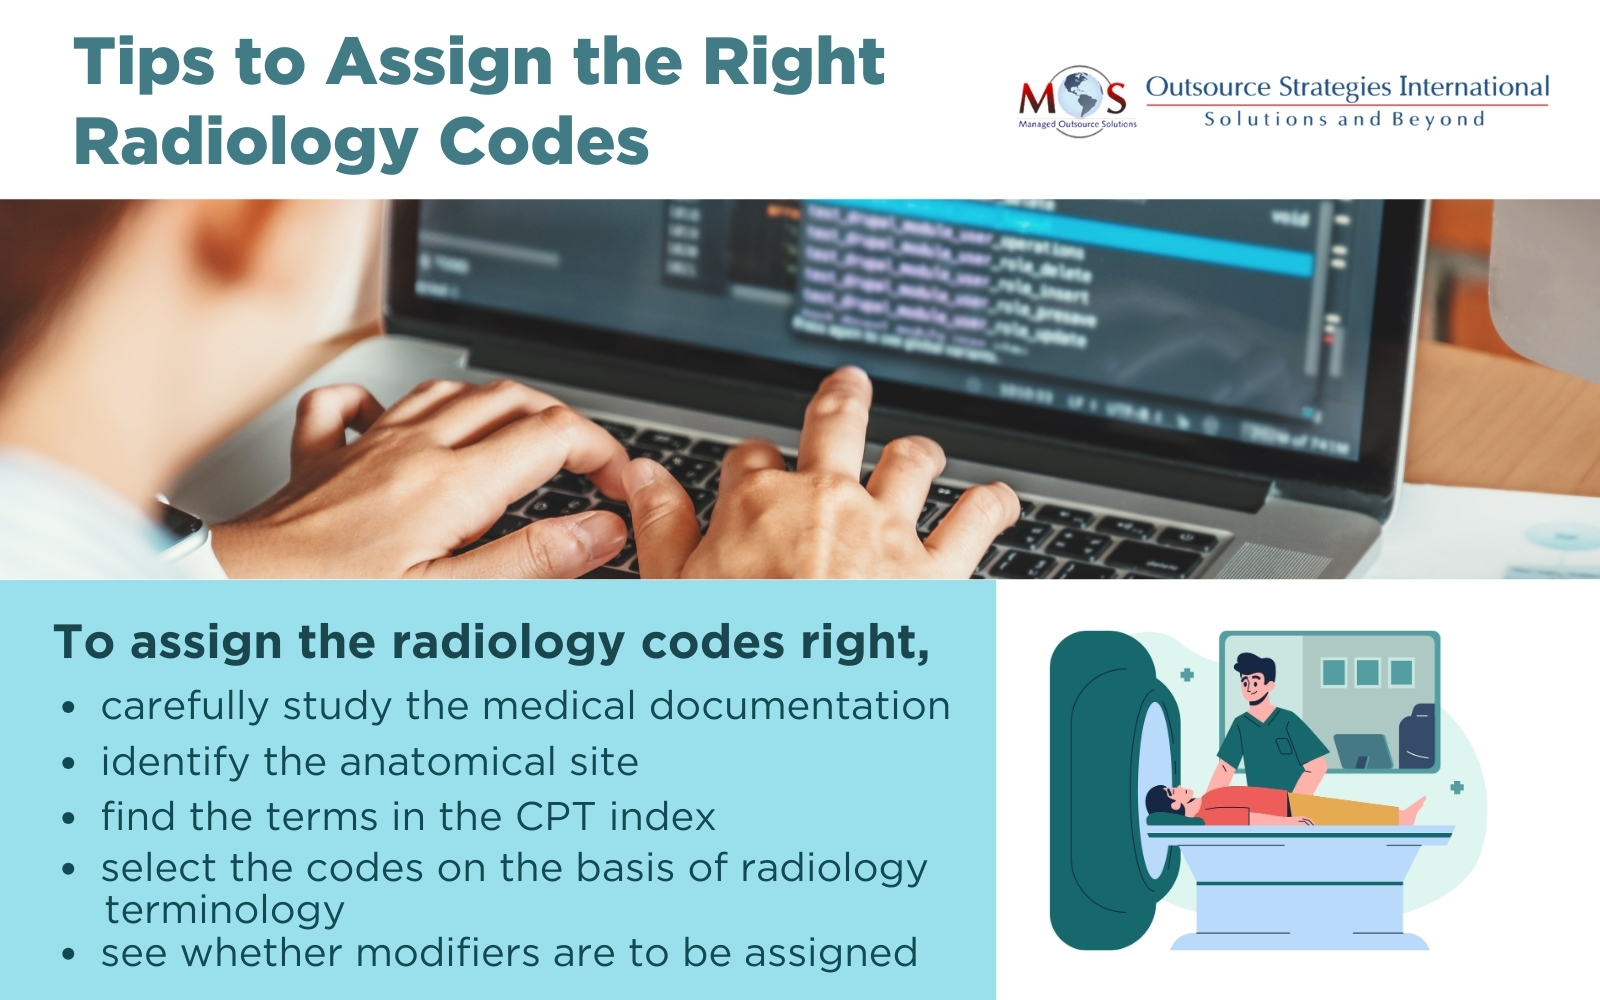 Tips to Assign the Right Radiology Codes